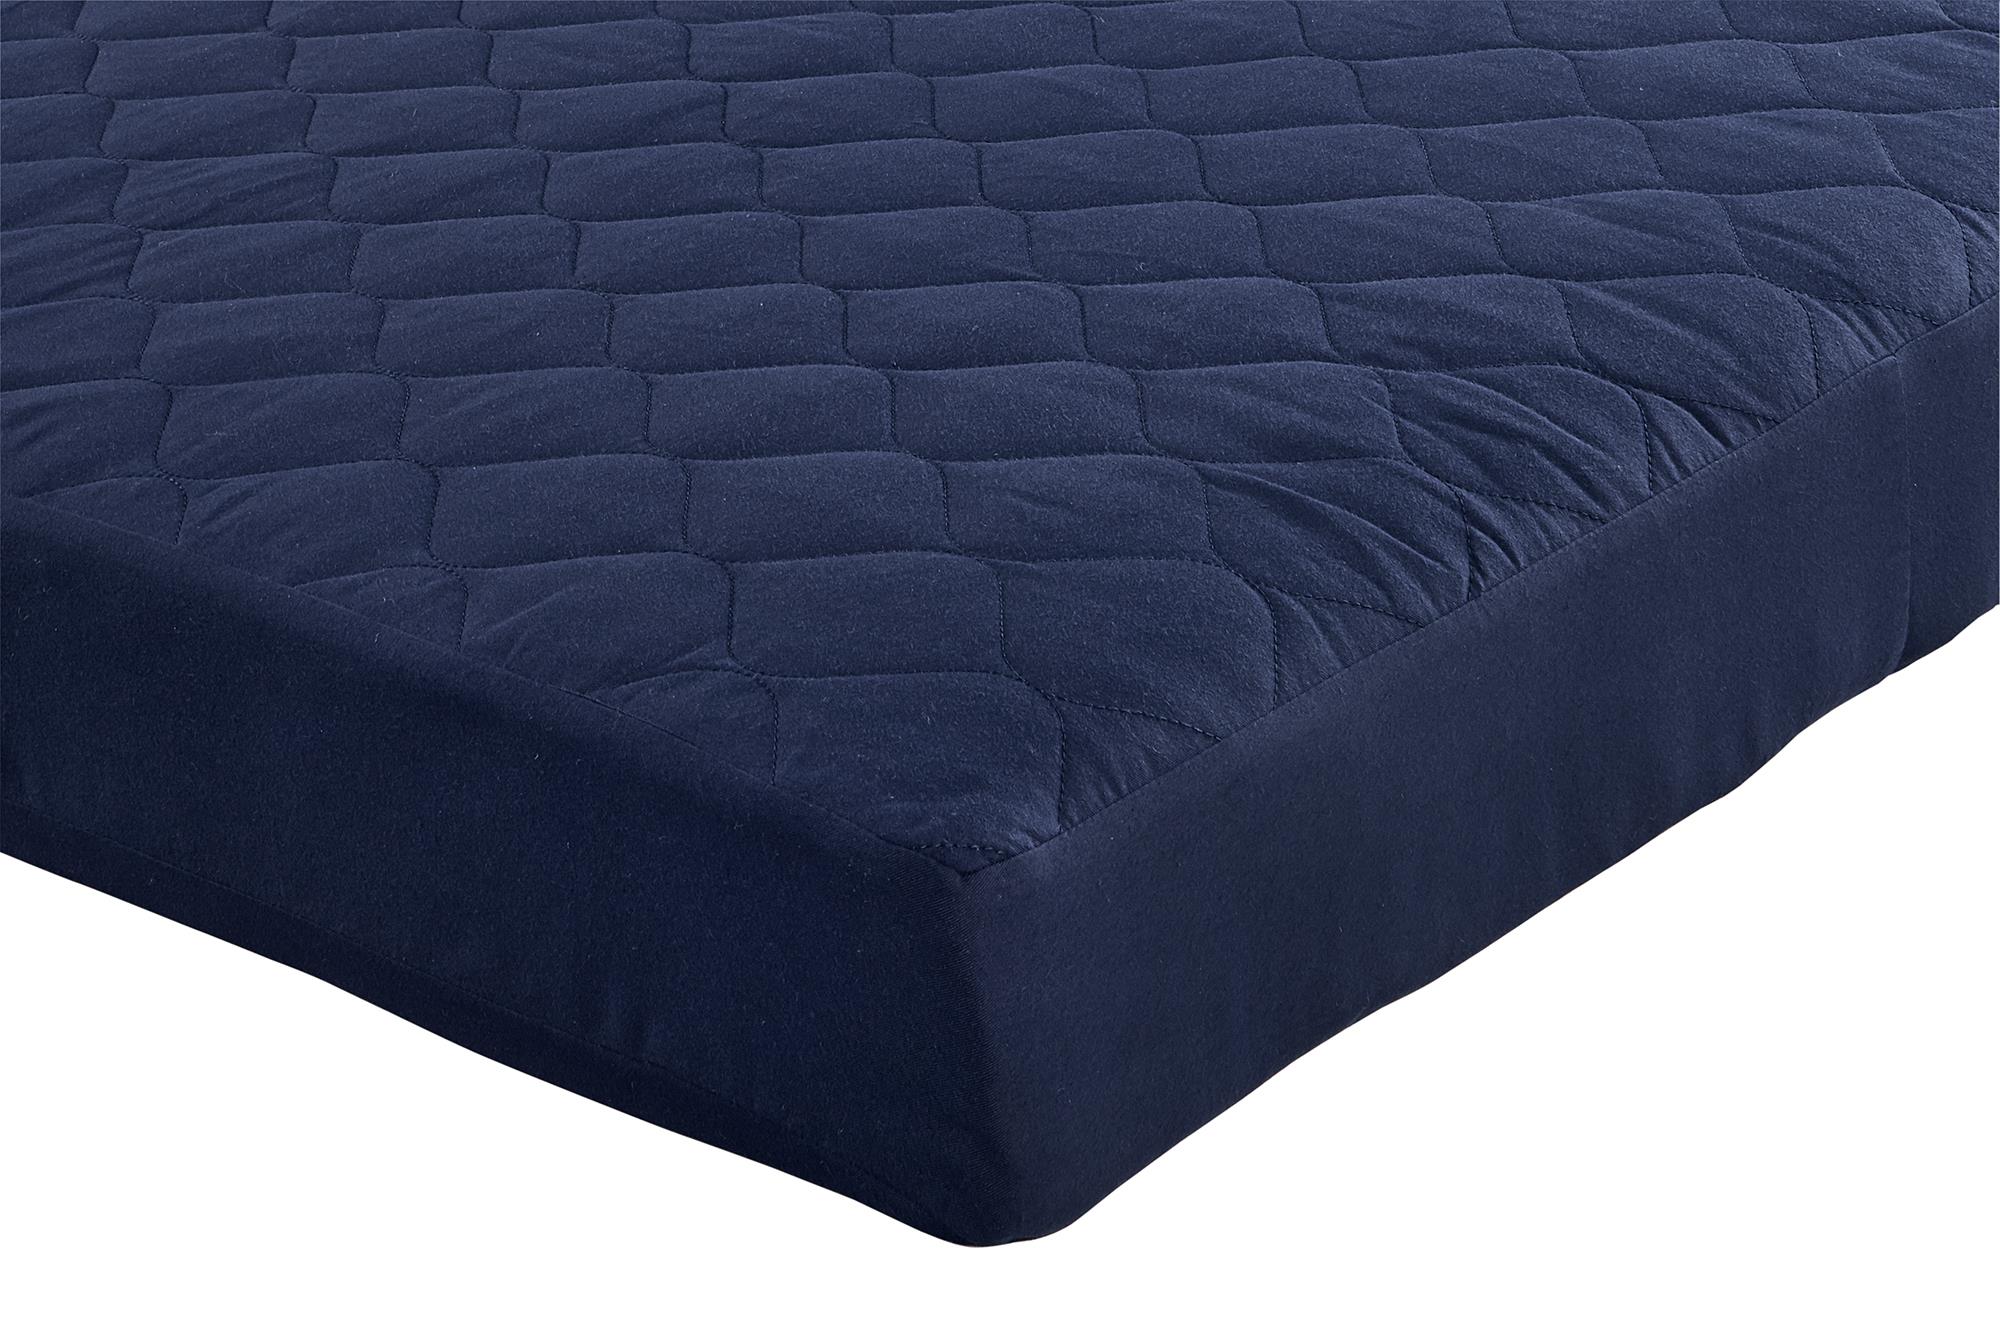 DHP Value 6 Inch Thermobonded Polyester Filled Quilted Top Bunk Bed Mattress, Twin, Navy - image 9 of 11